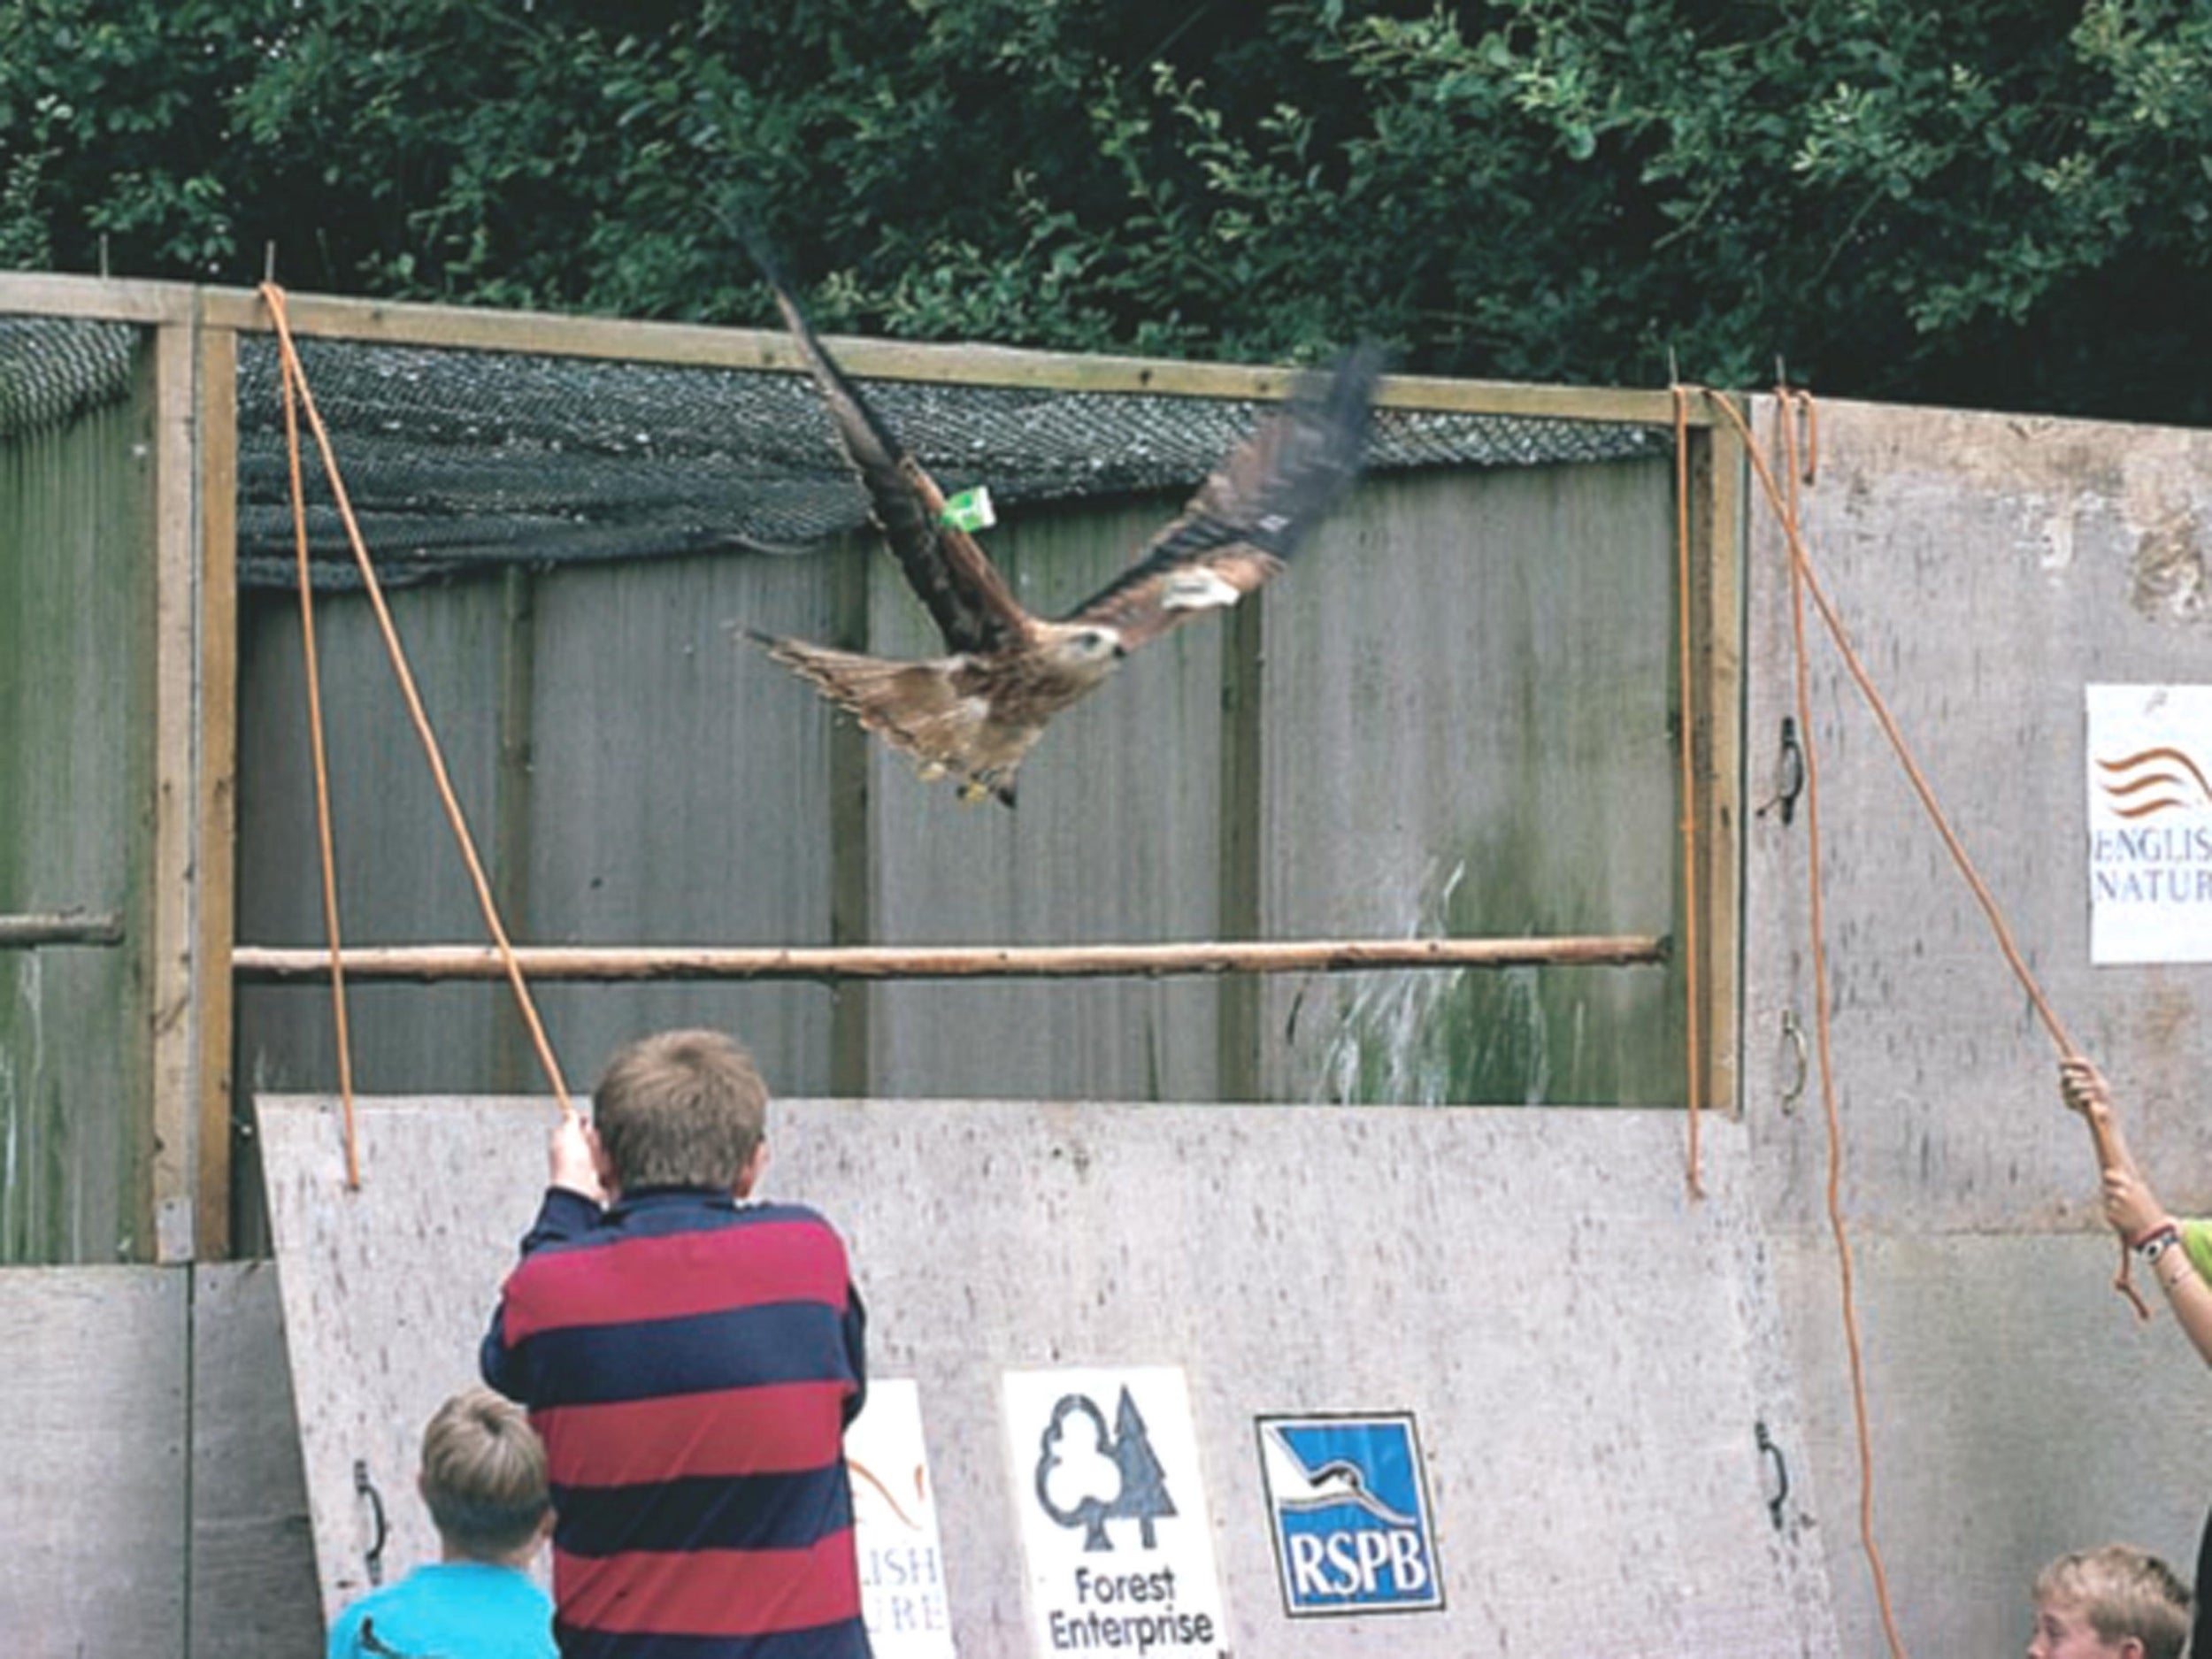 A red kite is released into the wild